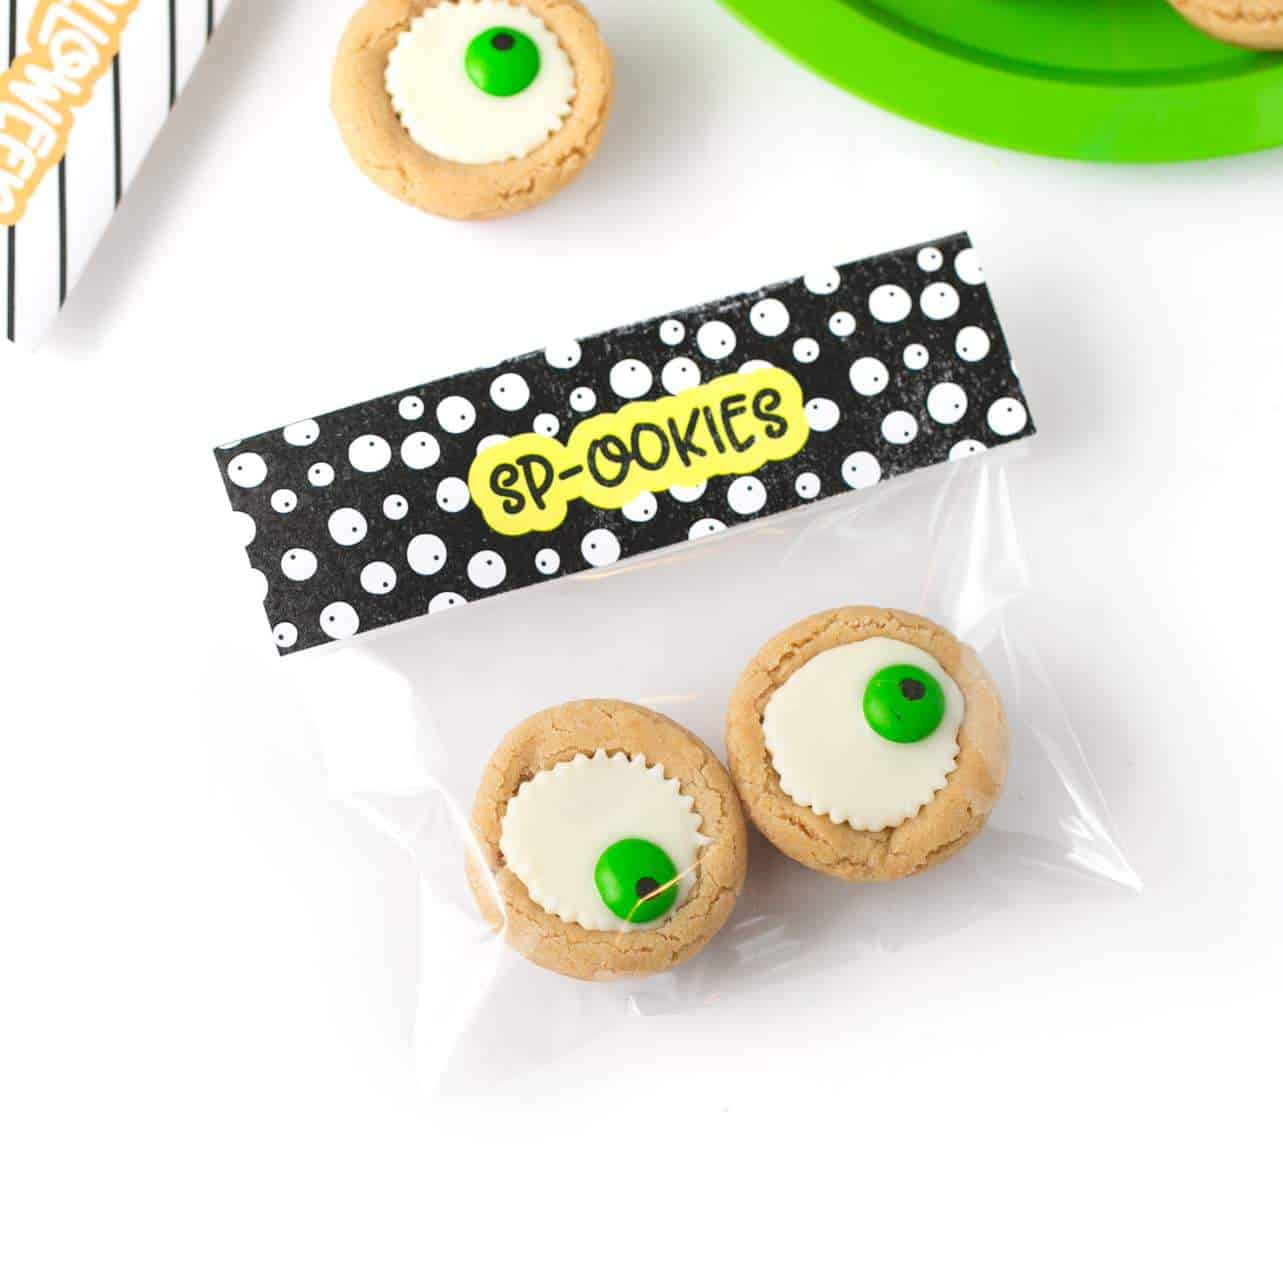 Easy Halloween Eyeball Cookies the kids can help with! After baking, simply press a miniature white peanut butter cup and M&M into the top of each one for a spooky (but cute!) halloween cookie idea.  #Halloween #Cookies #EyeballCookies | www.DesignEatRepeat.com